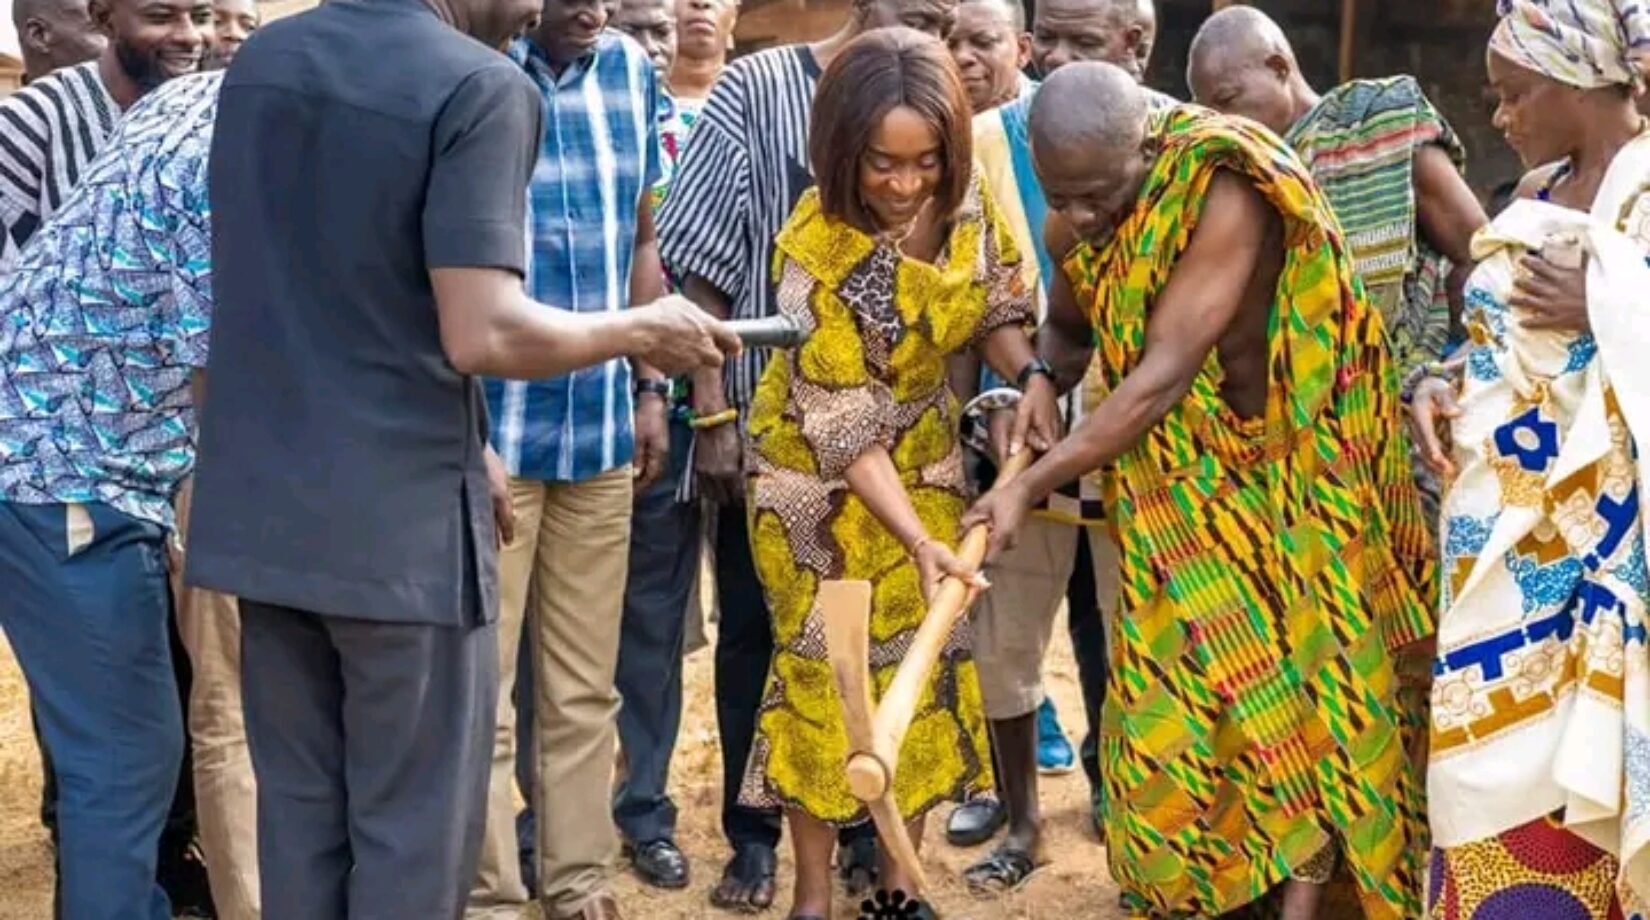 Atiwa East MP cuts sod for 5 educational infrastructure projects